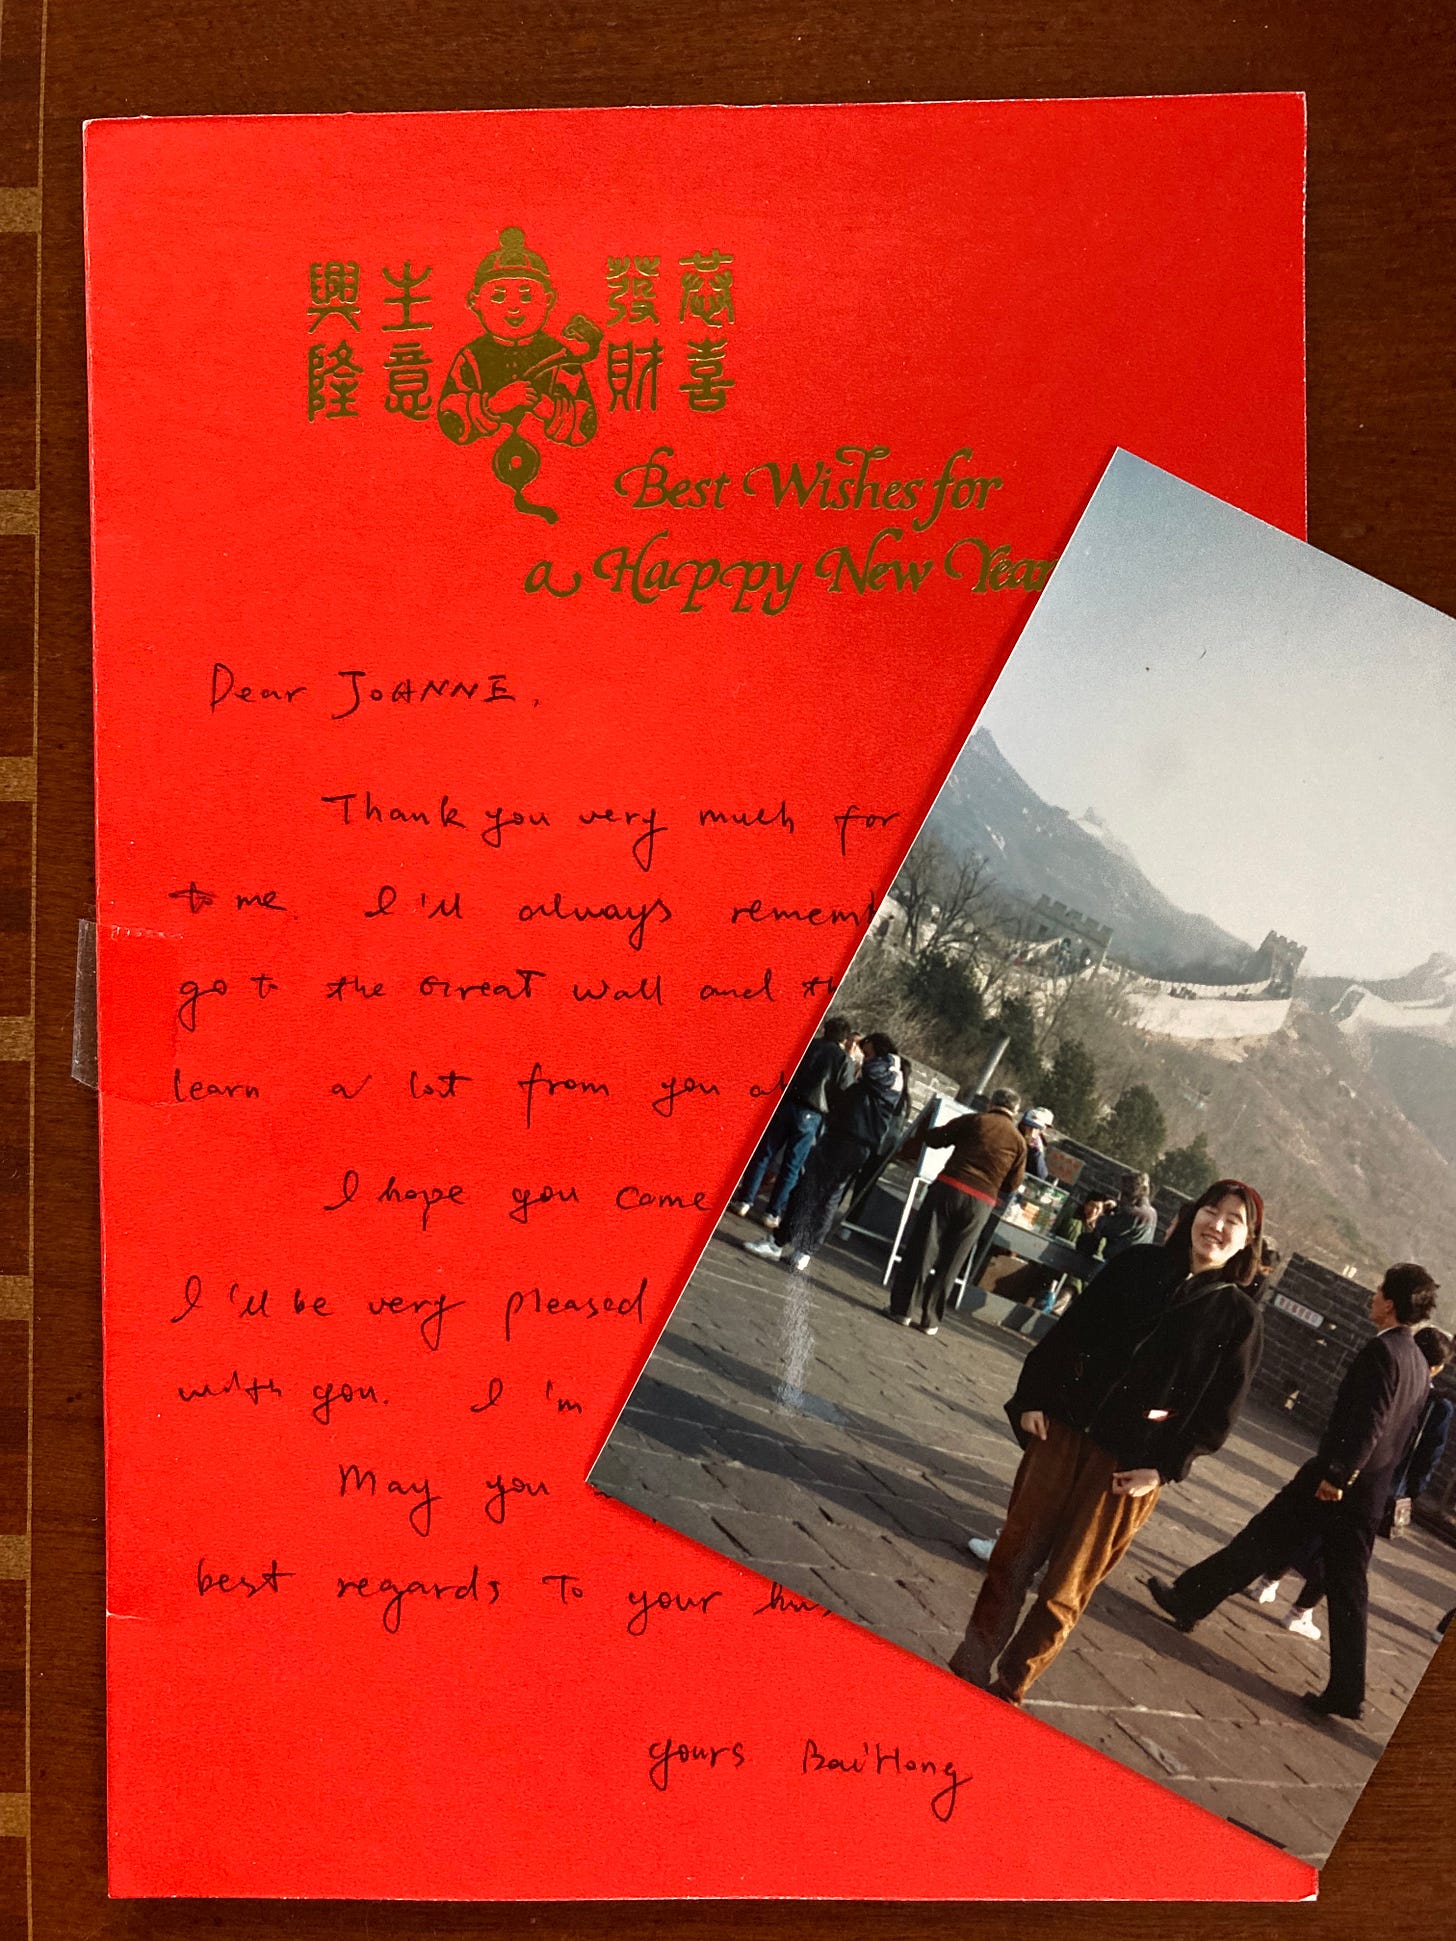 Thank you note is displayed next to a photo of a young woman standing on the Great Wall of China